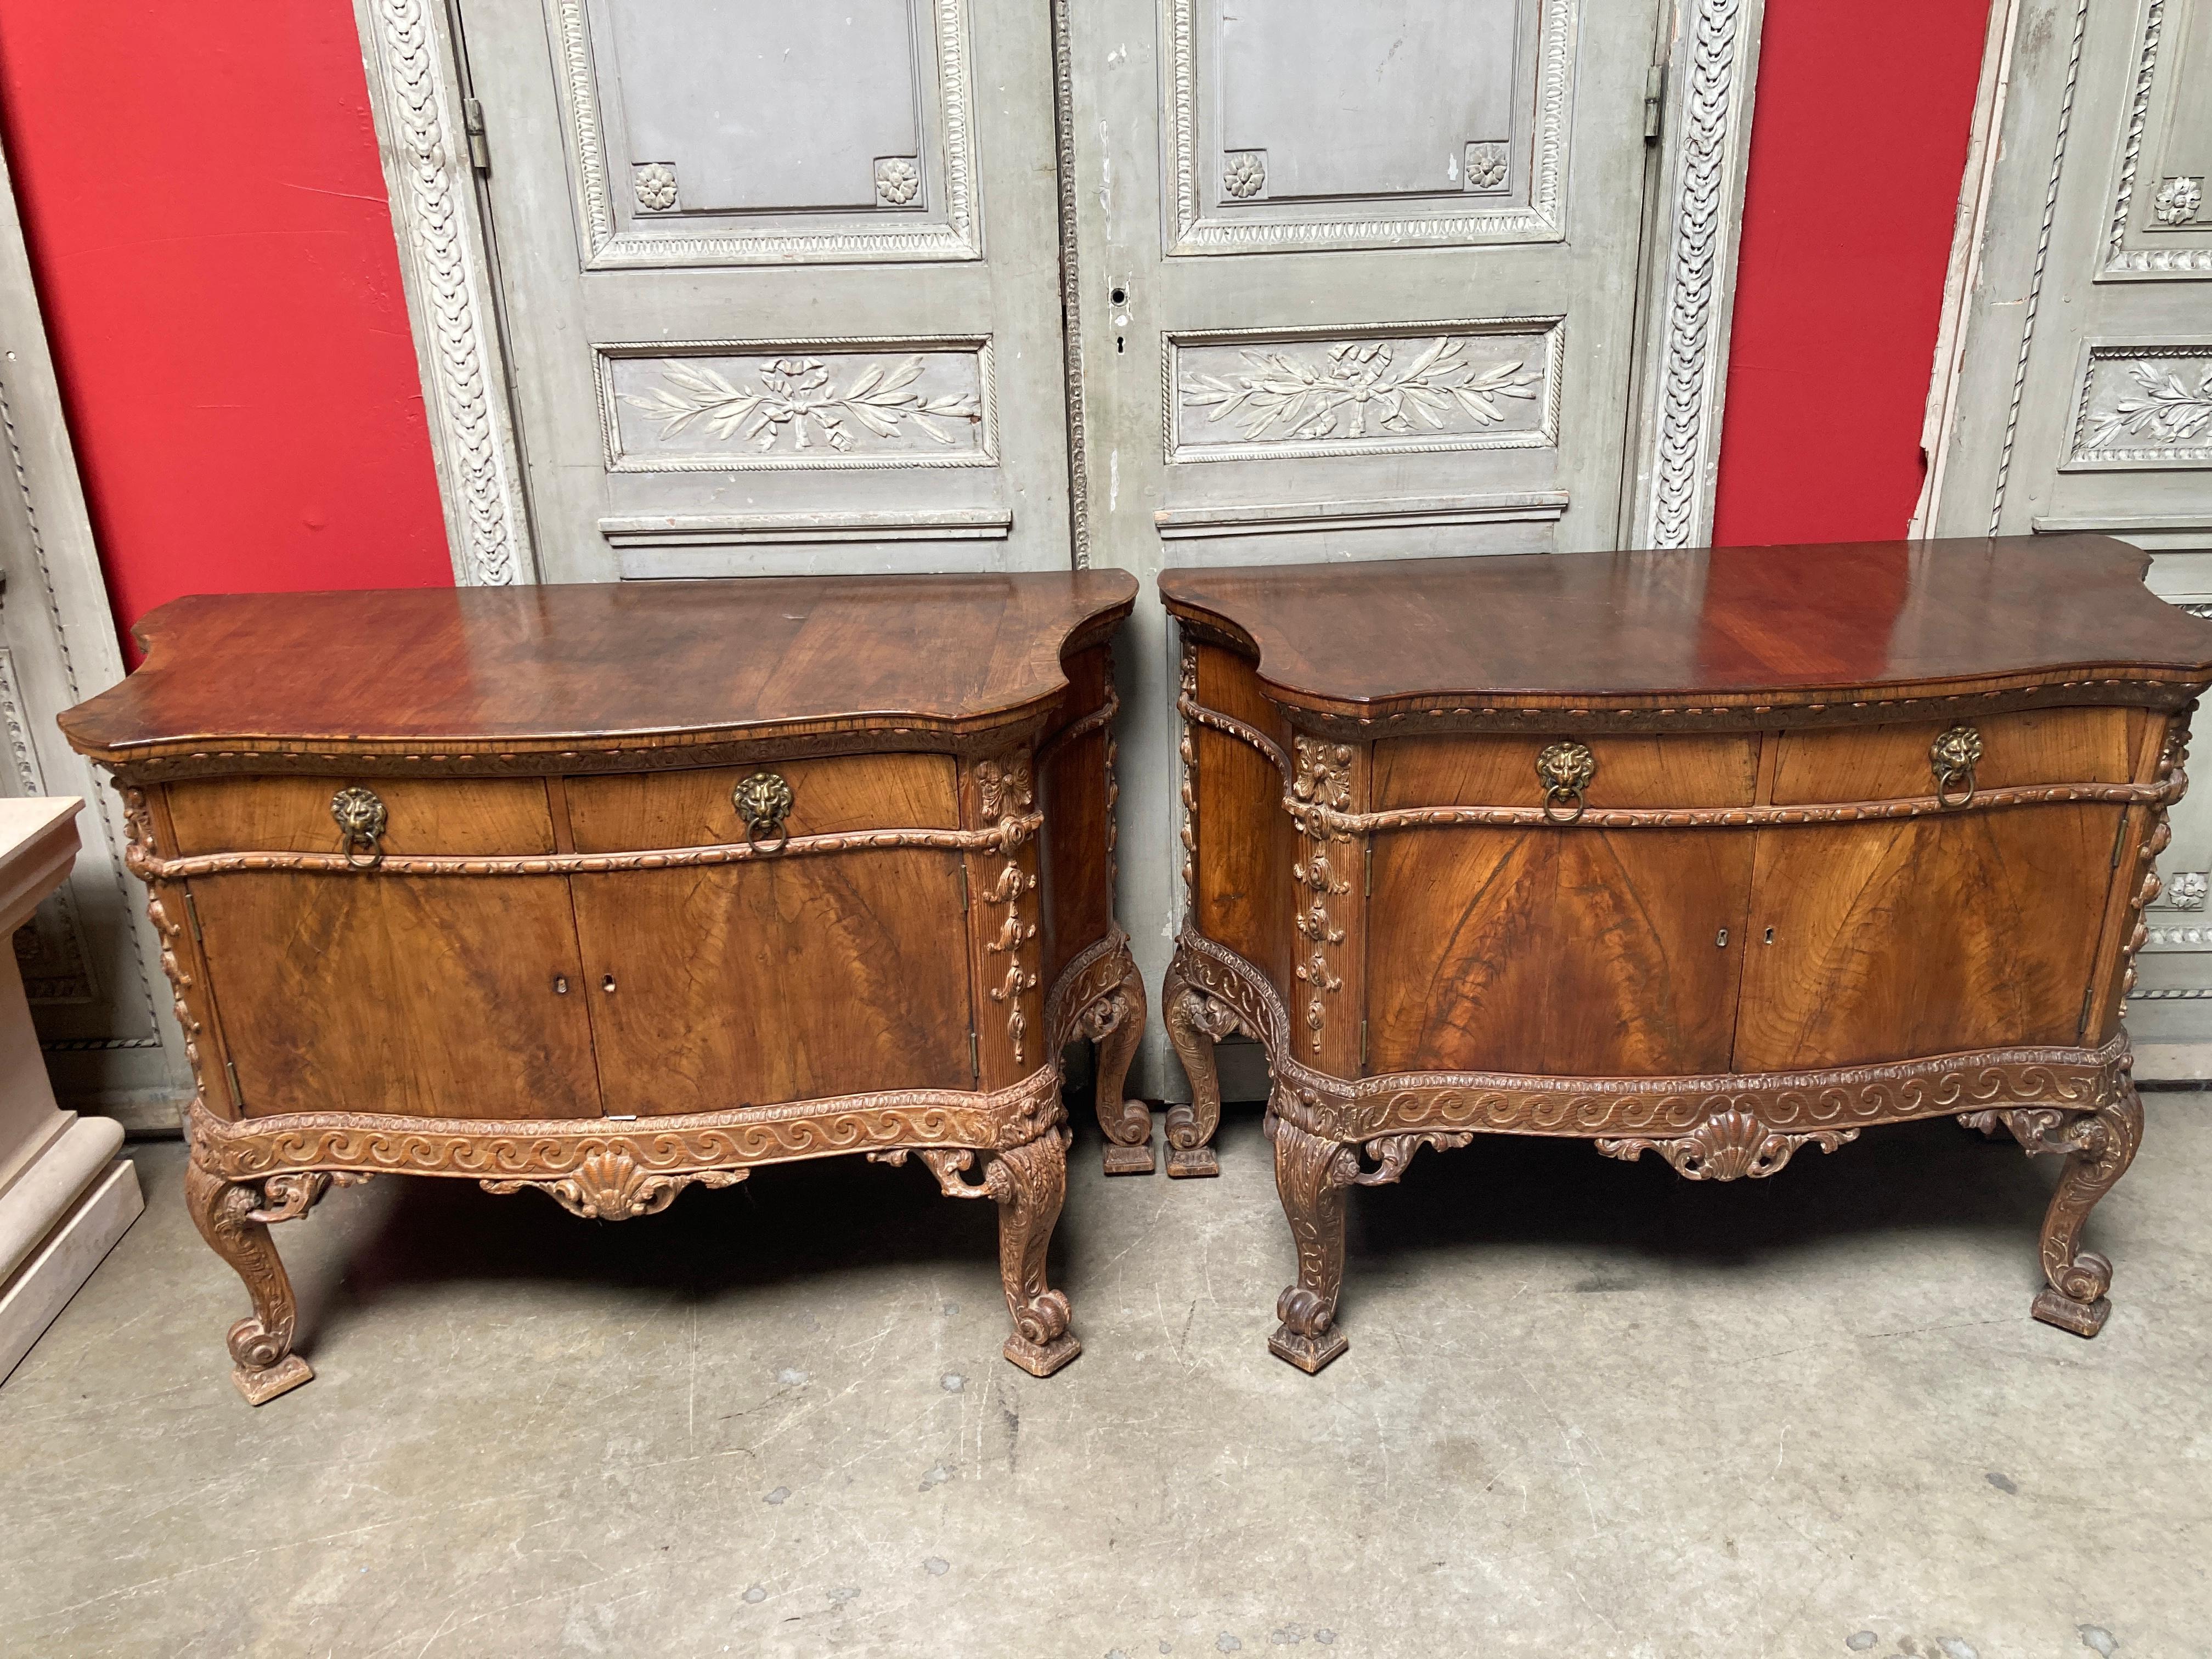 A pair of English George II style cabinets in burled walnut and pine from the 19th century. 
The pair of nicely carved cabinets have cabriole legs and have of two drawers and doors each.